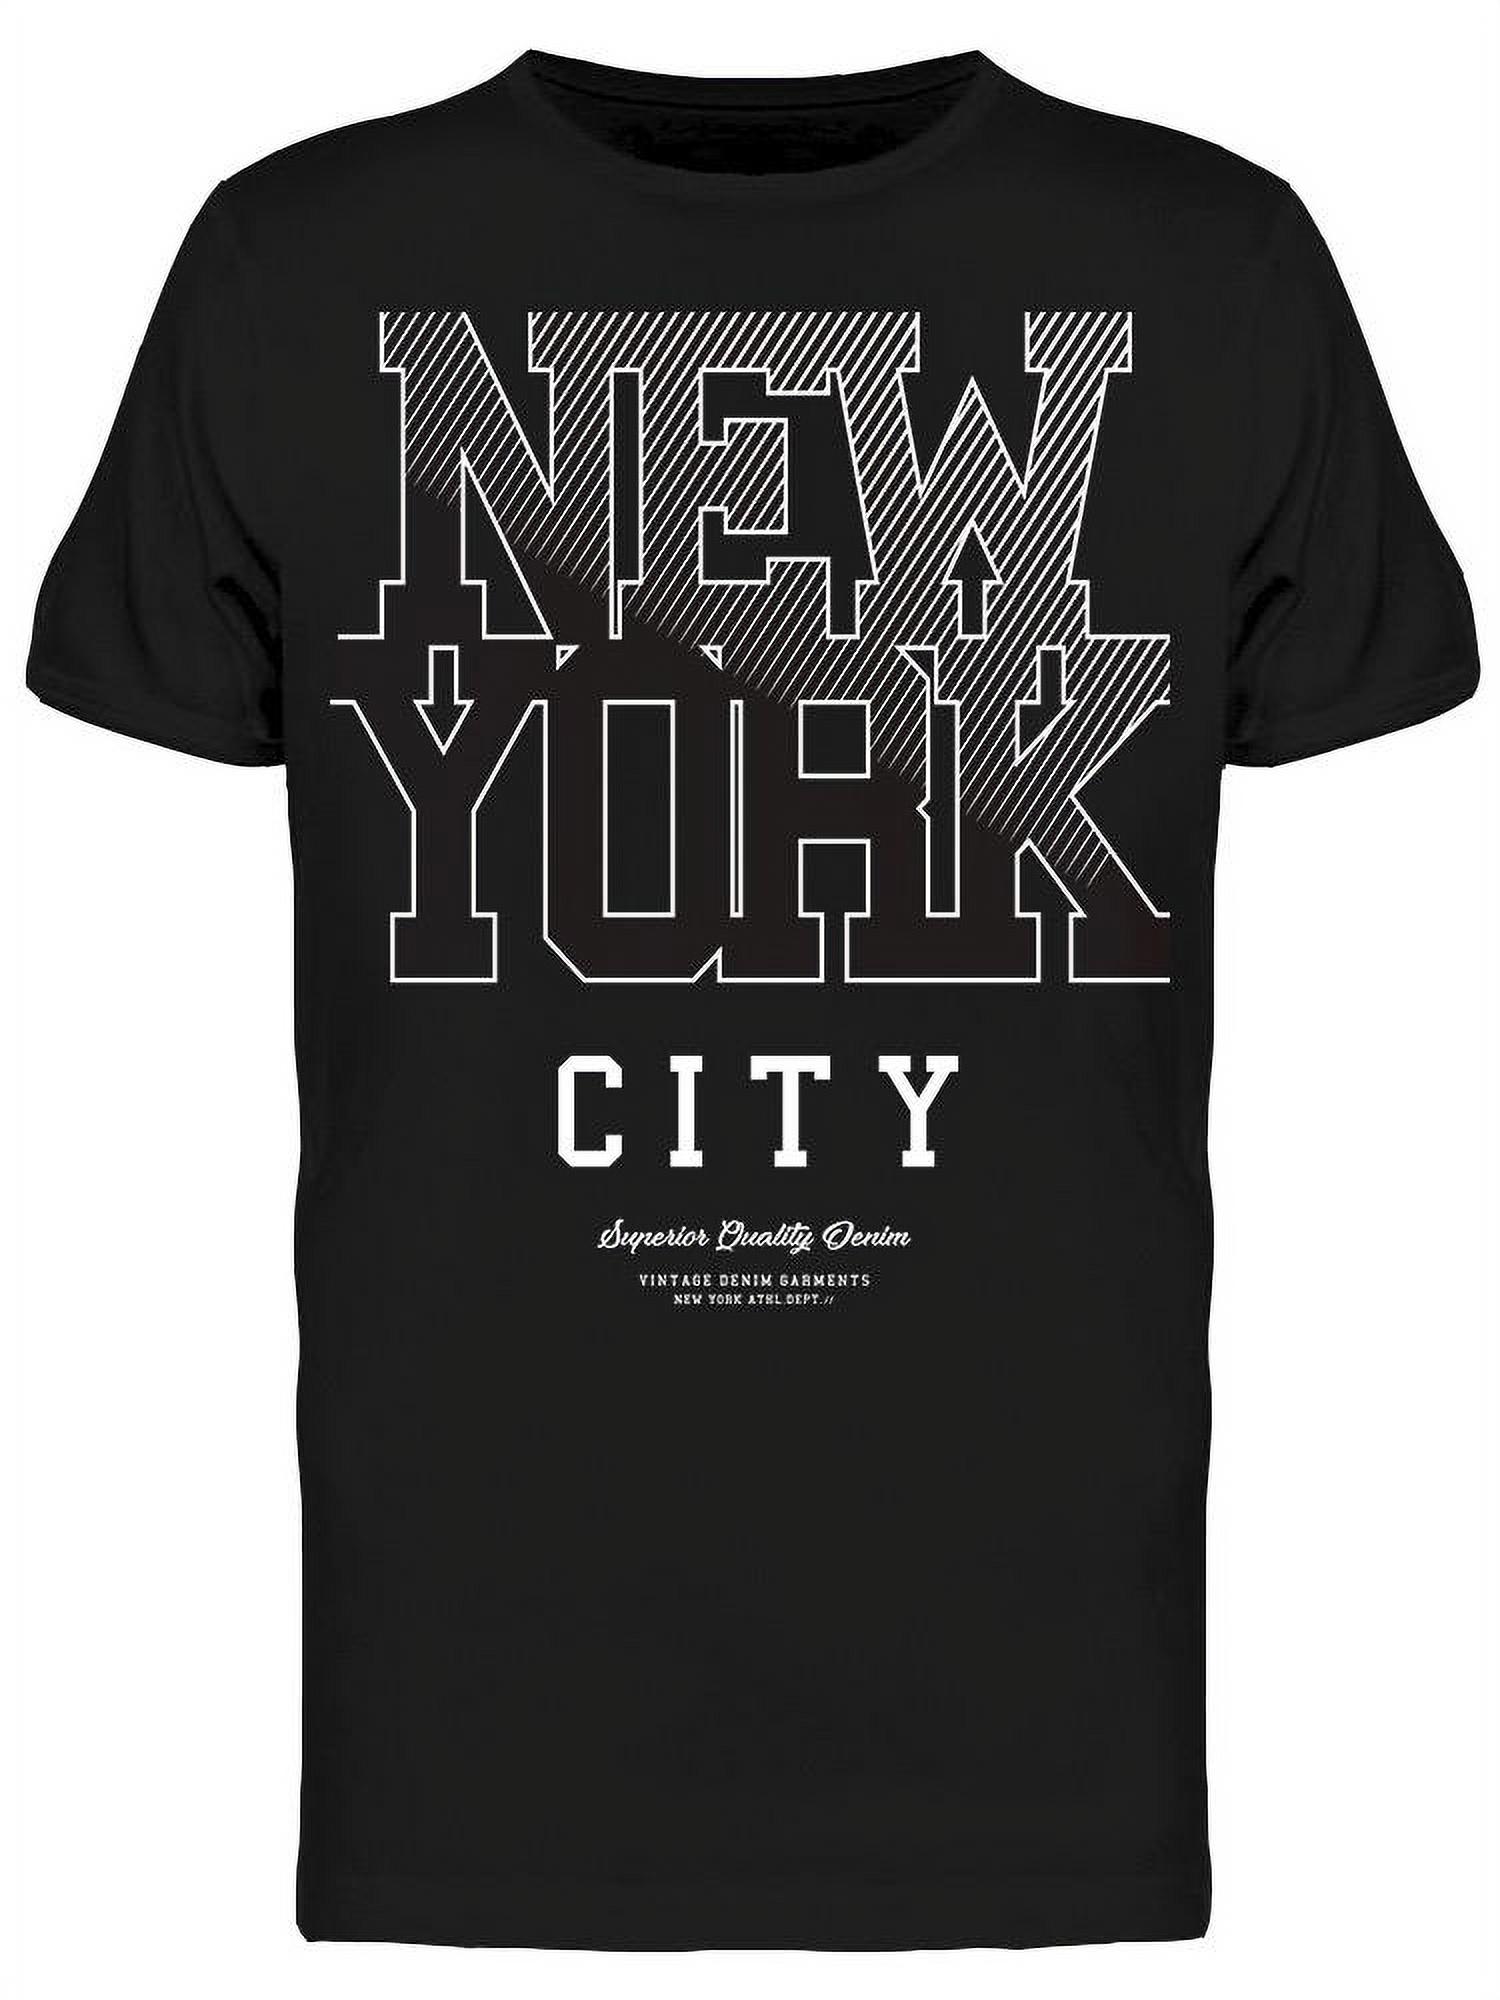 City Lettering  T-Shirt Men -Image by Shutterstock, Male XX-Large - image 1 of 2